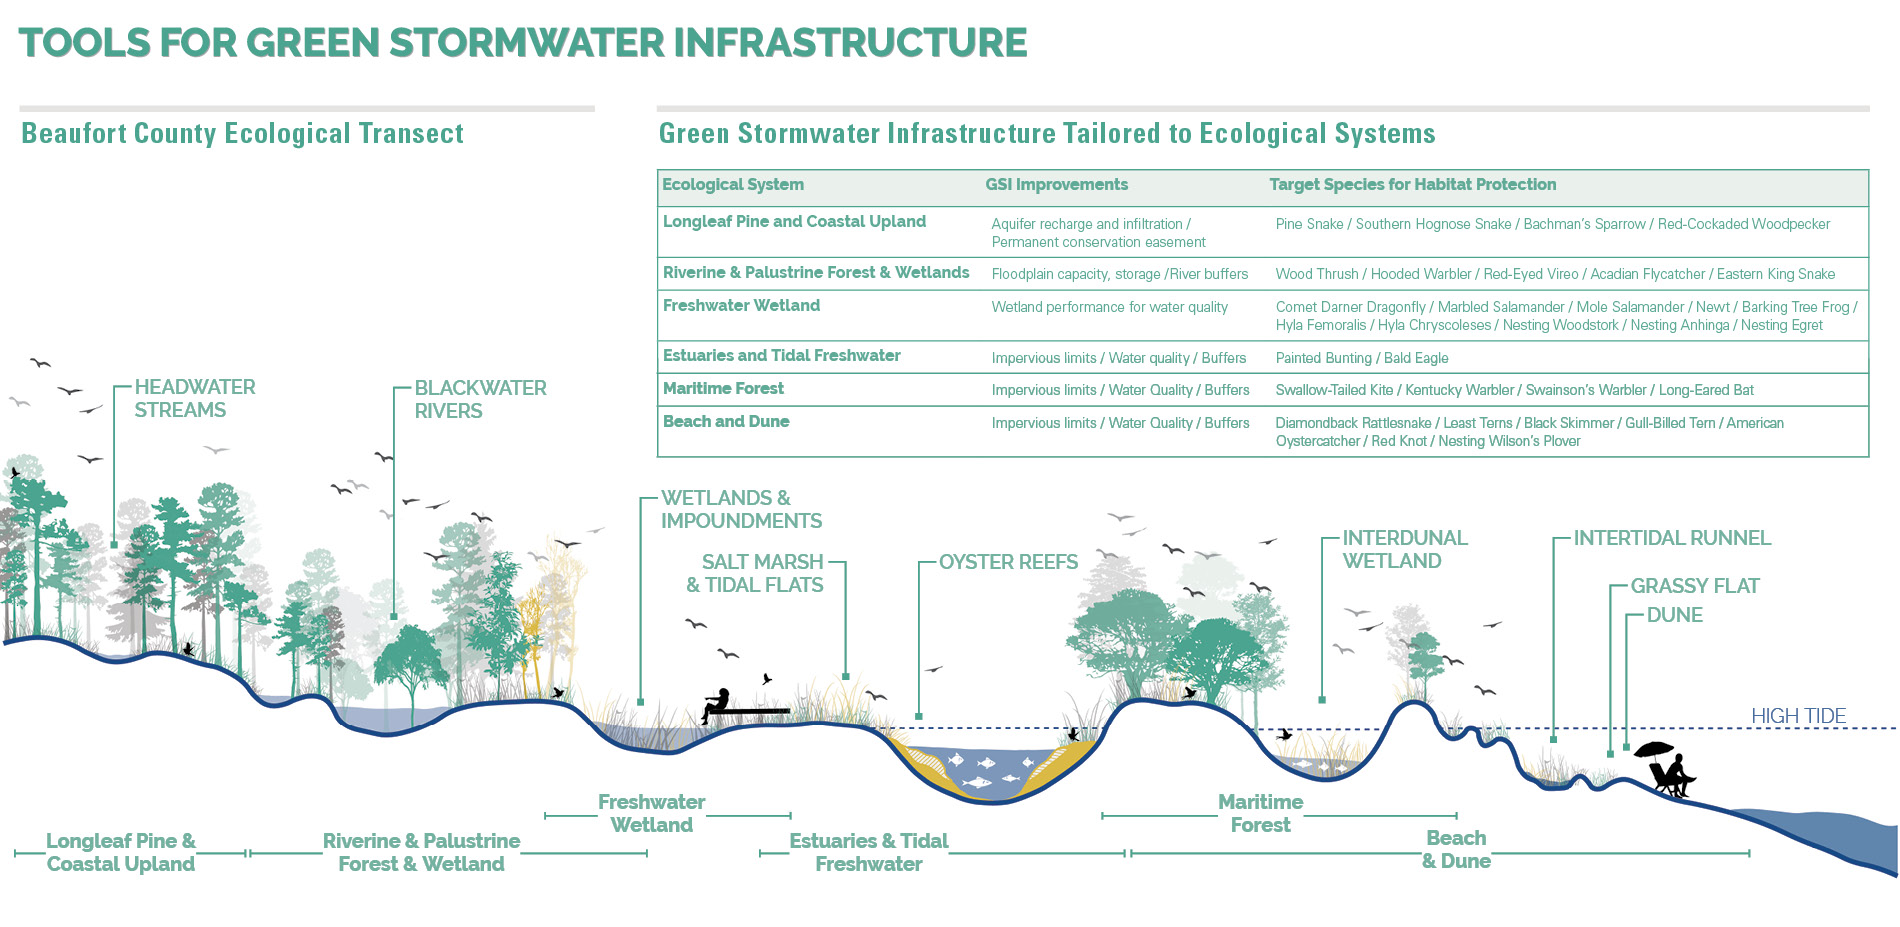 Tools for Green Stormwater Infrastructure